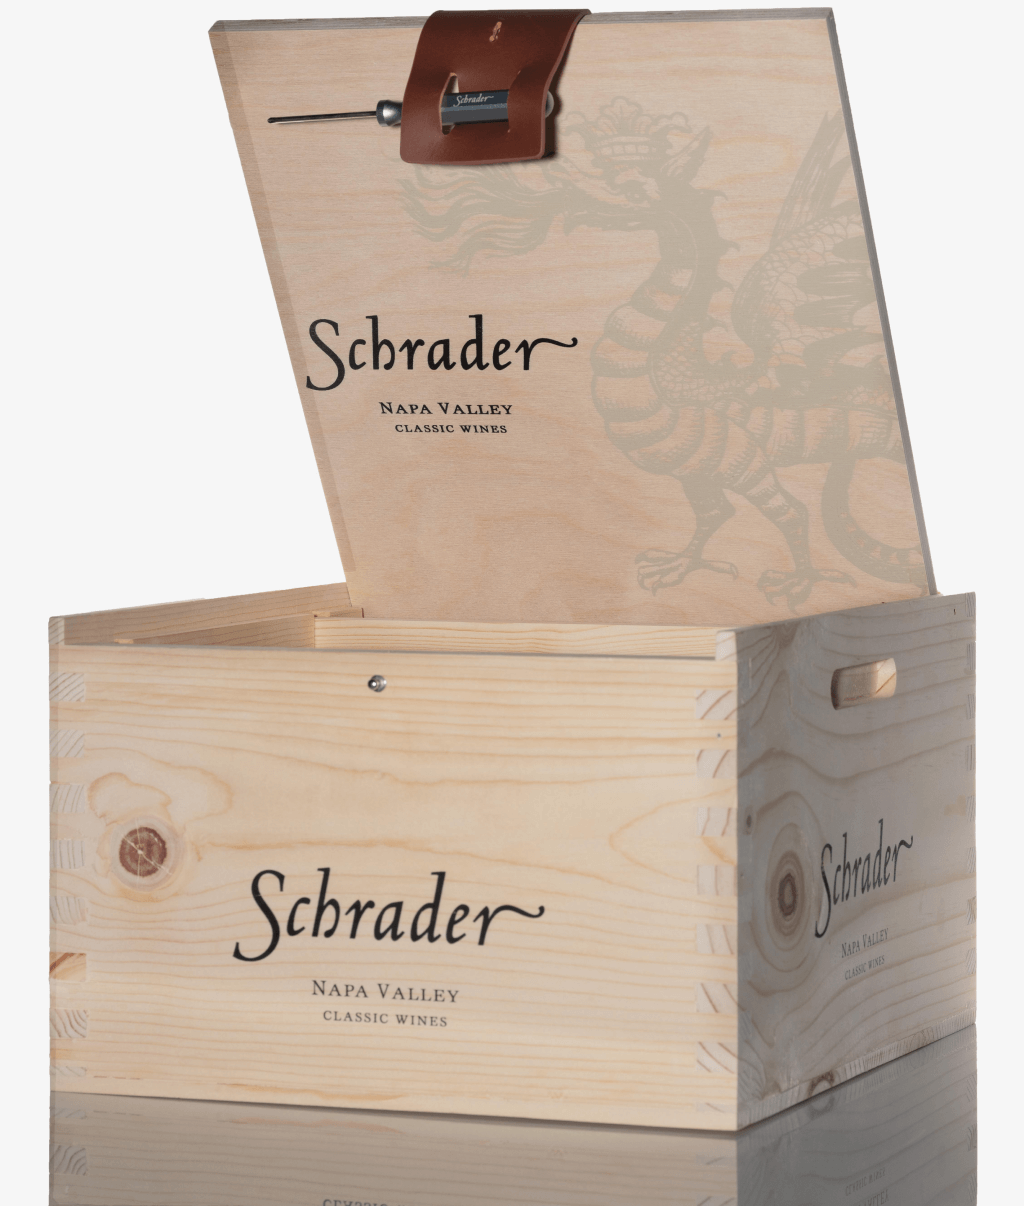 A wooden box with the word sdrader on it.